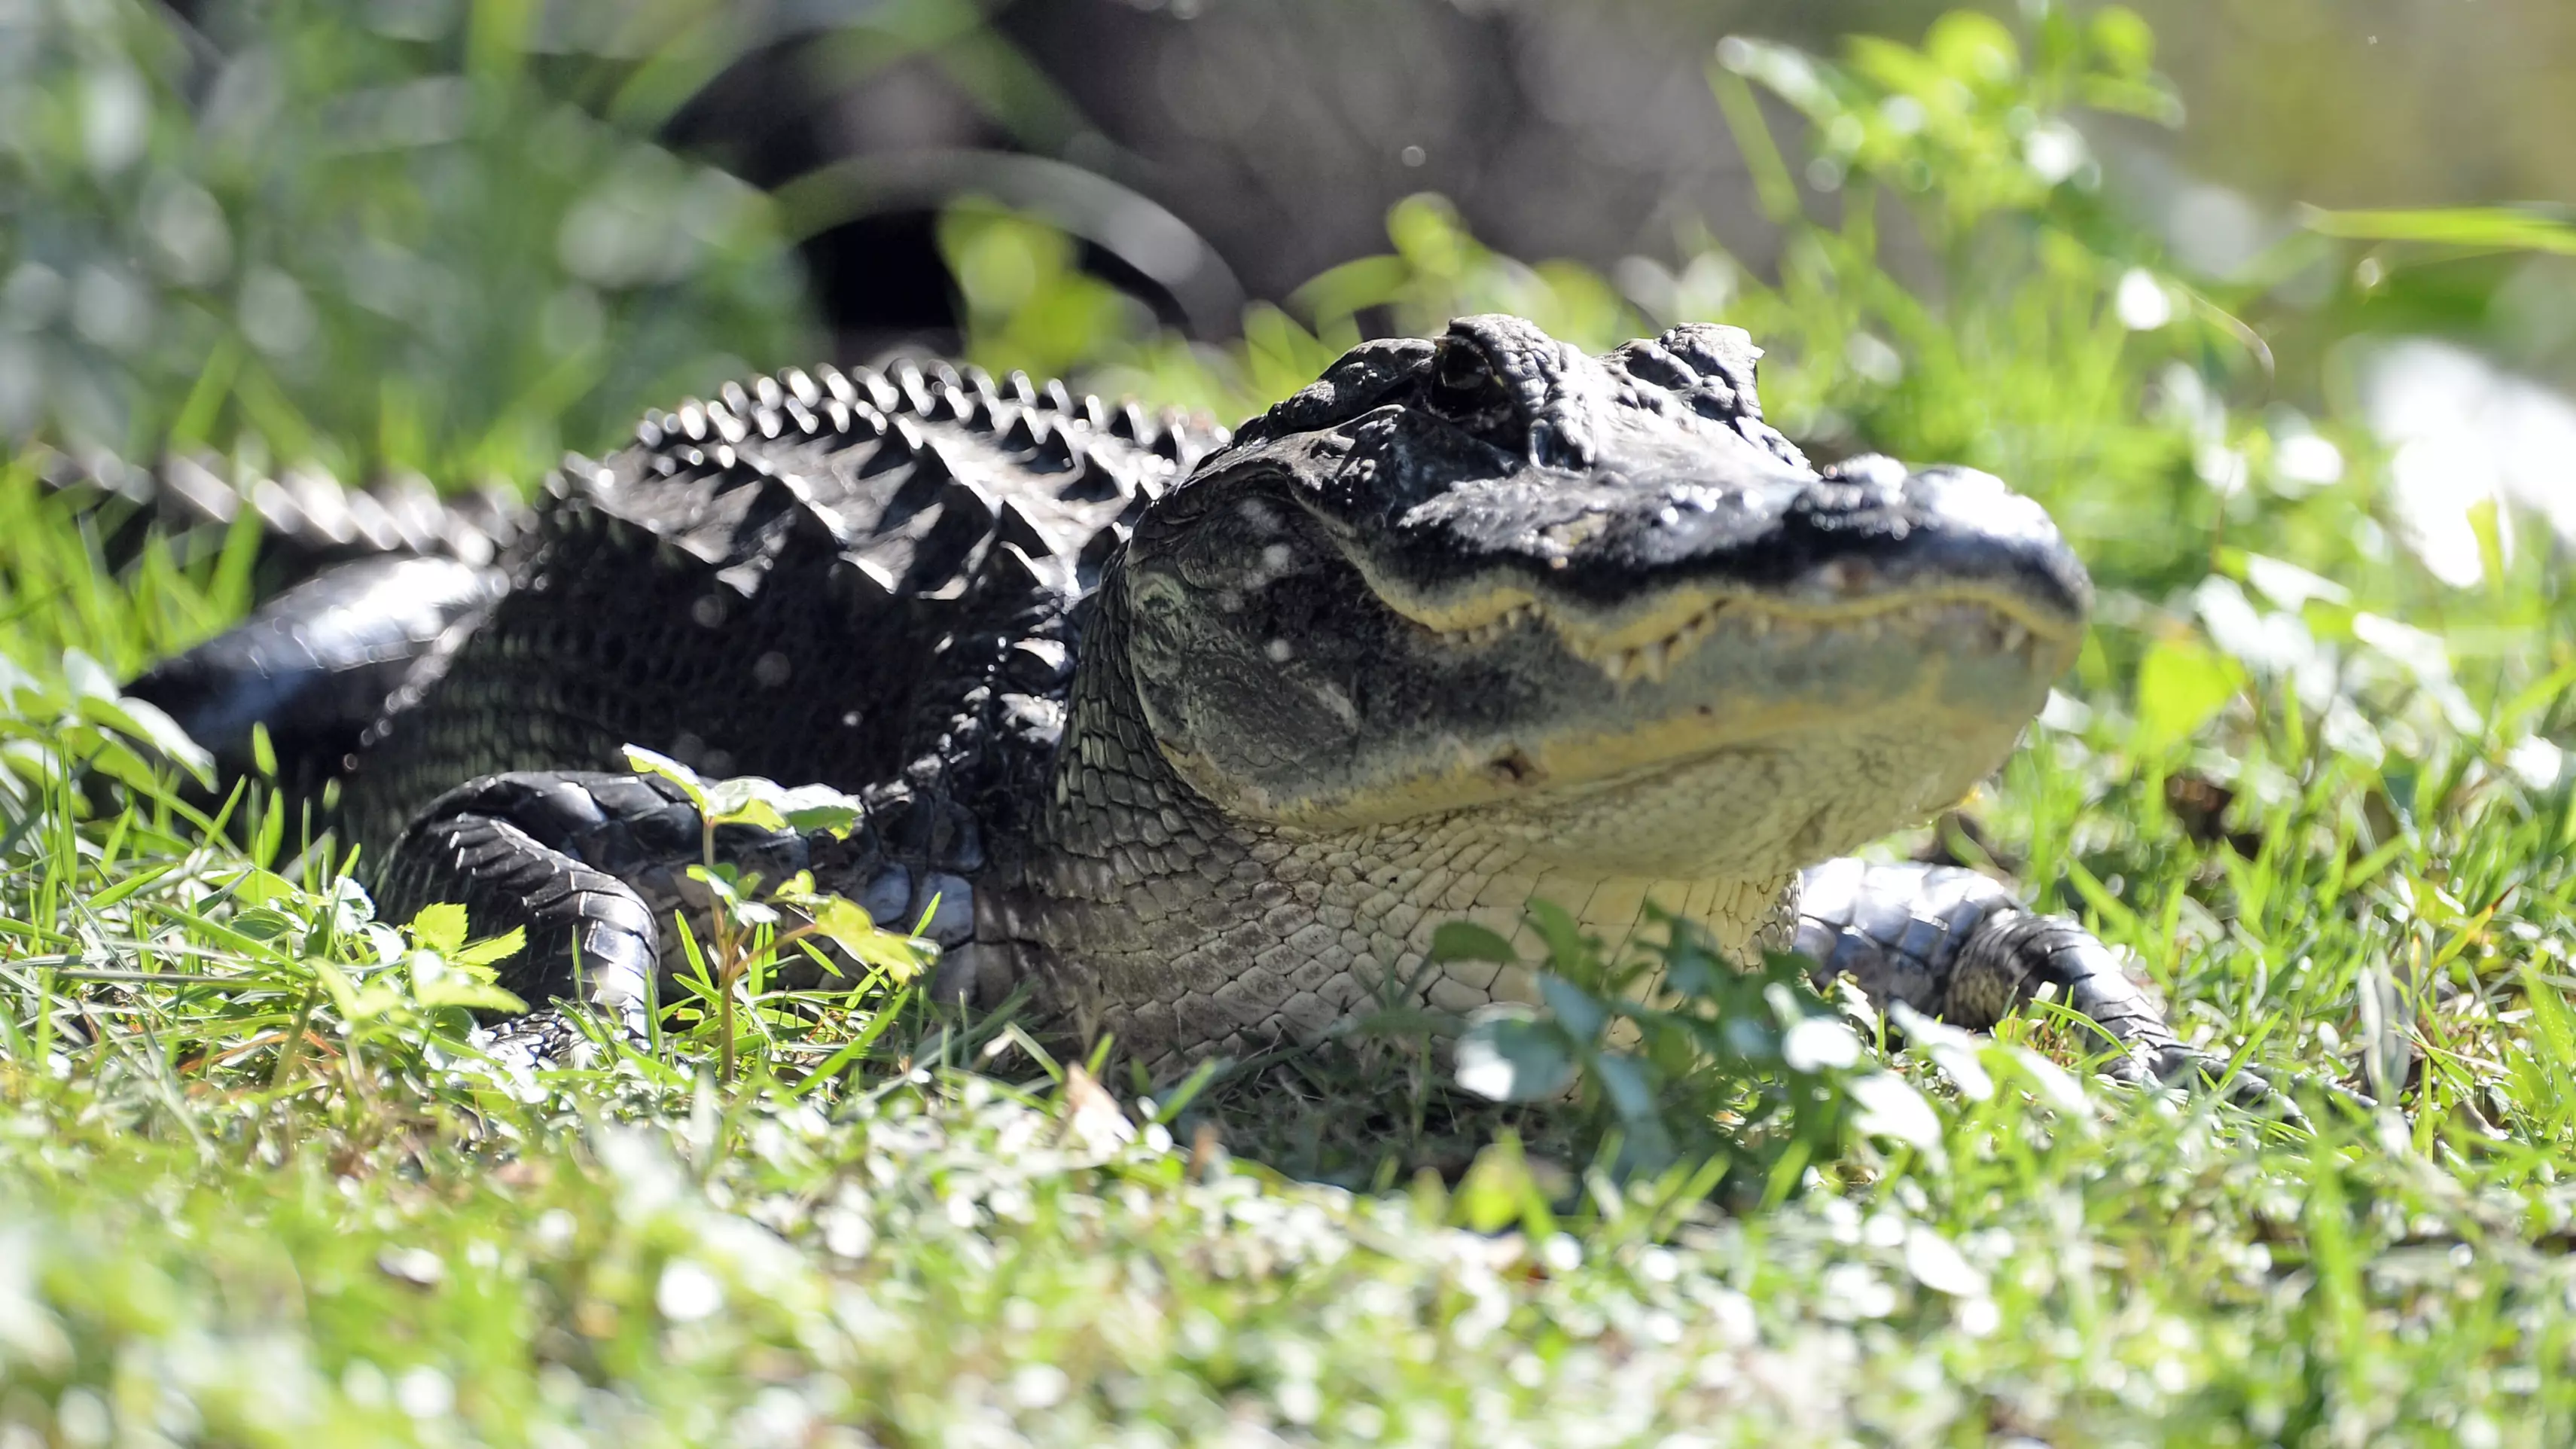 Woman Killed By Alligator After Becoming 'Fascinated' By It 